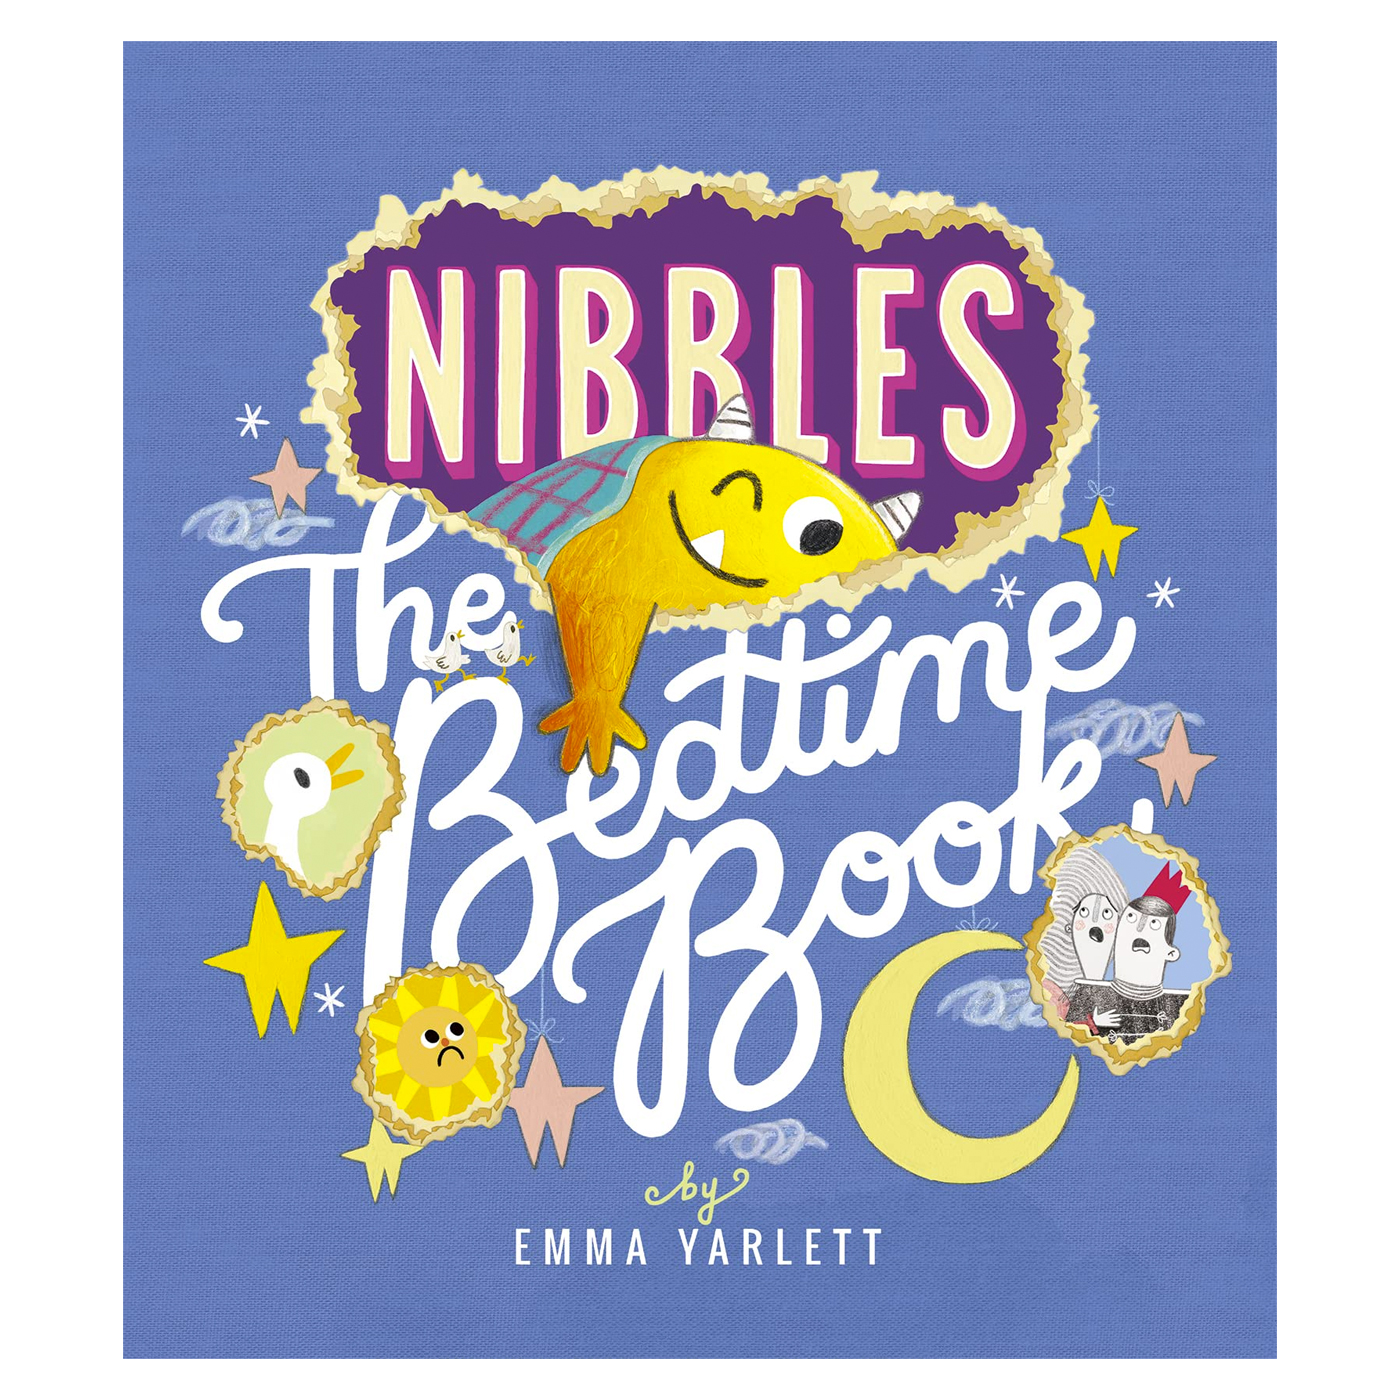  Nibbles The Bedtime Book